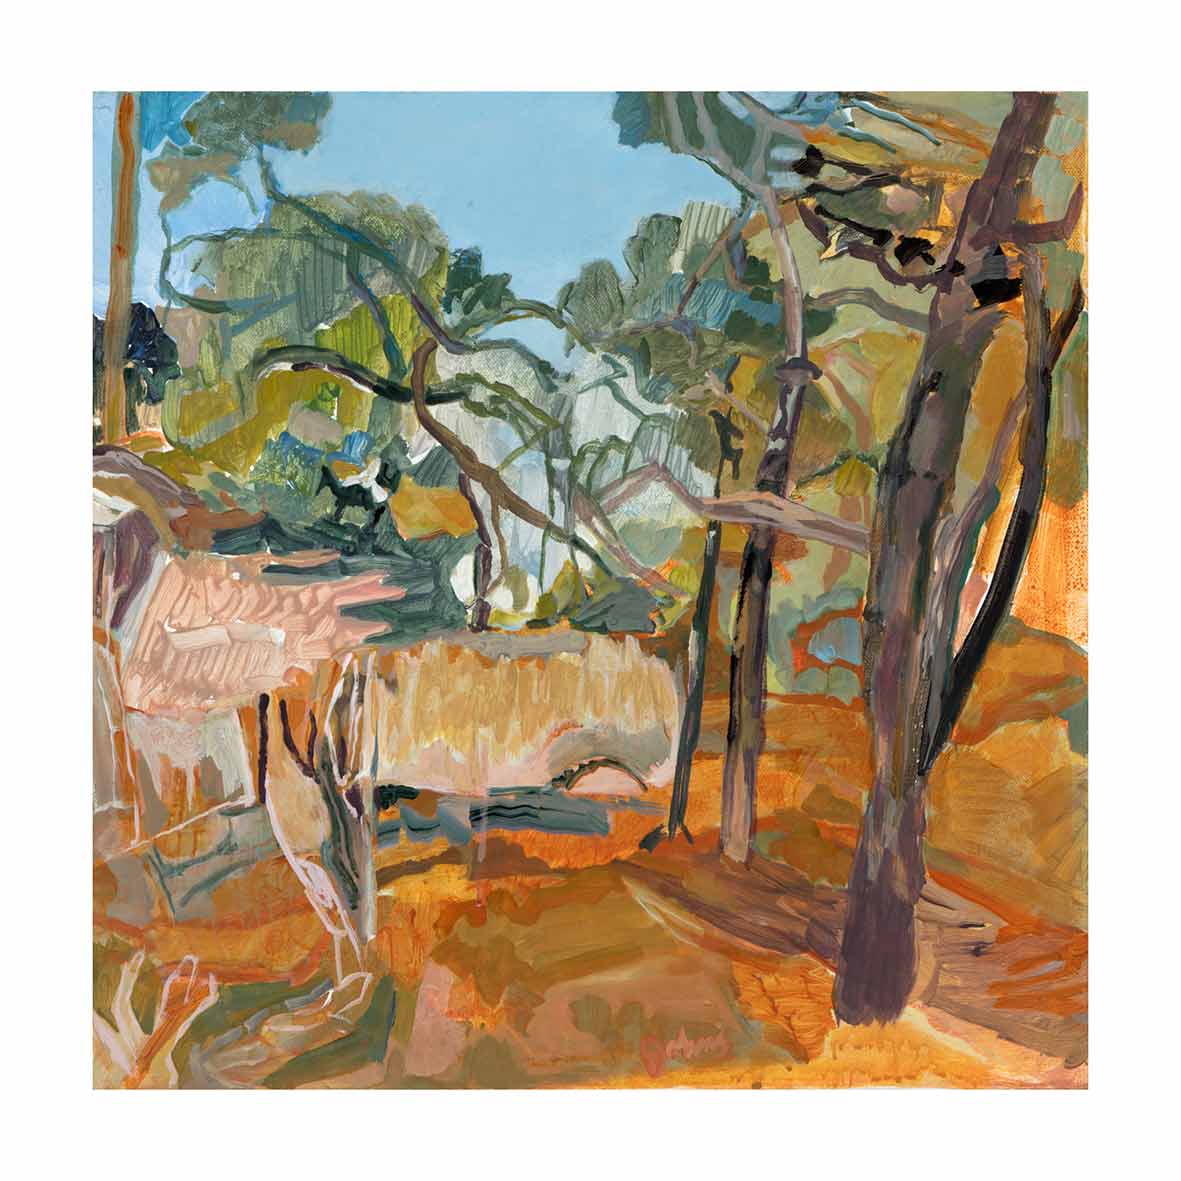 Kerry Johns | Finalist | 2018 NSW Parliament Plein Air Painting Prize